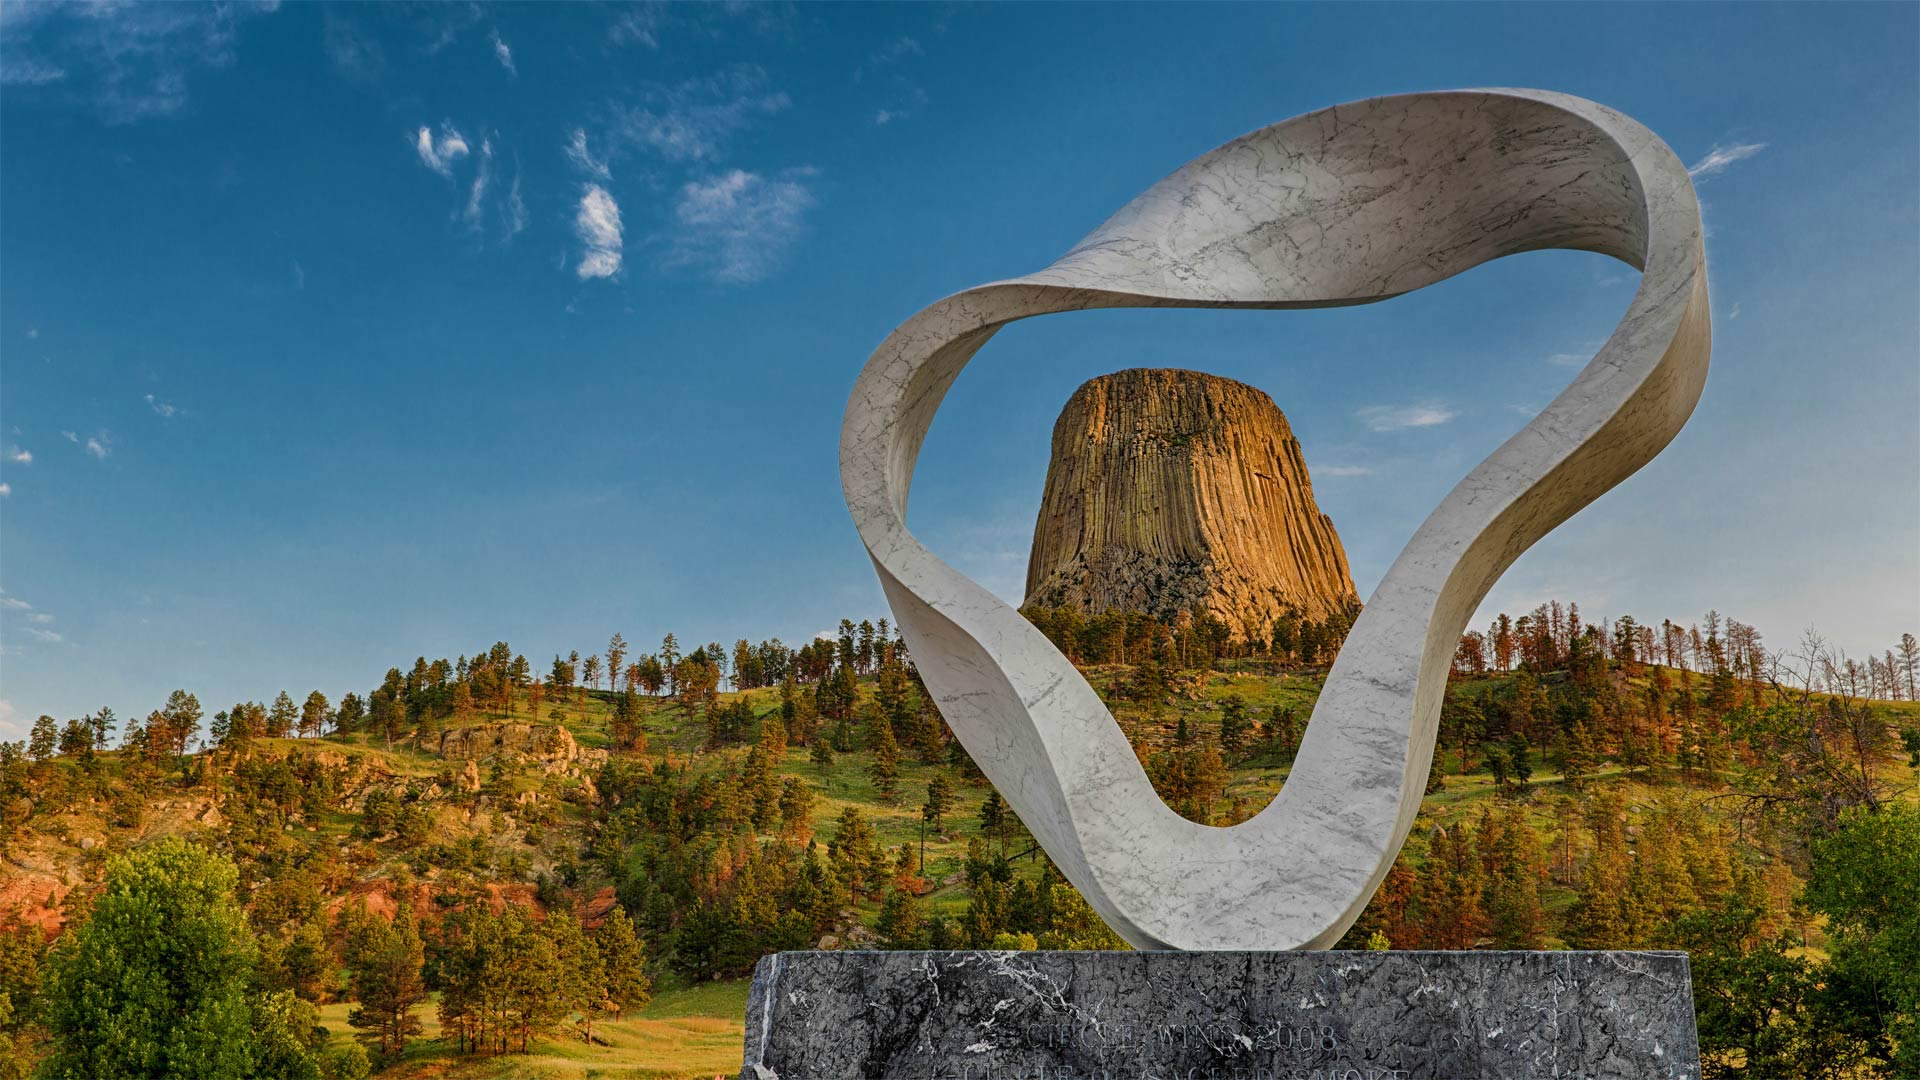 The 'Circle of Sacred Smoke' sculpture by Junkyu Muto frames Devils Tower in Wyoming - Nagel Photography/Shutterstock)